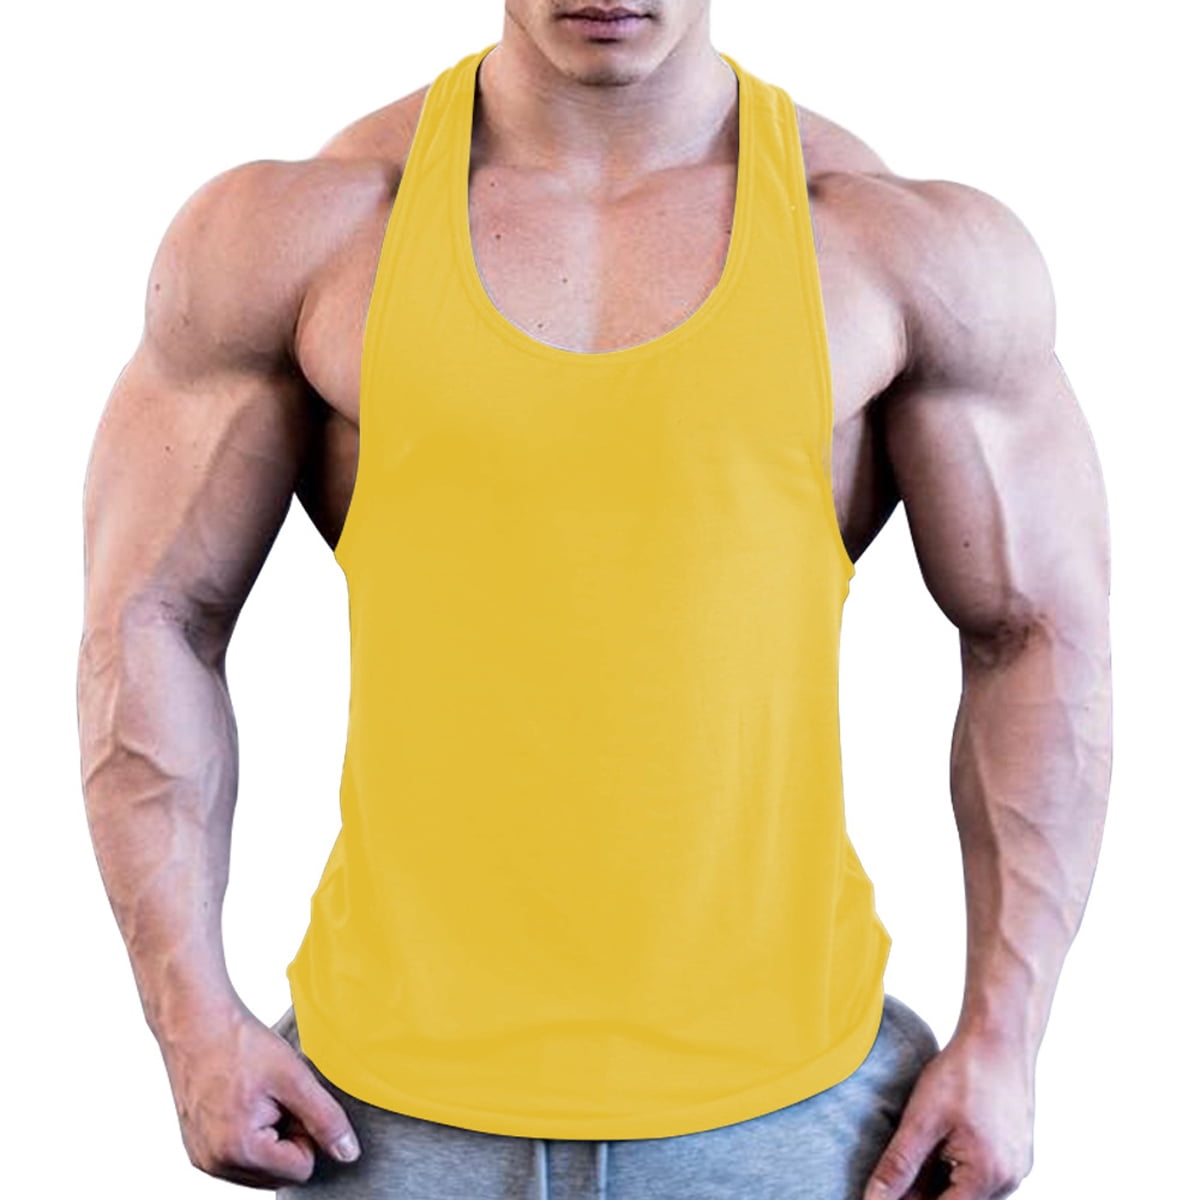 ATHLETIC  RUNNING  GYM MUSCLE GYM BODY BUILDING  VEST COTTON  M  L  XL  new